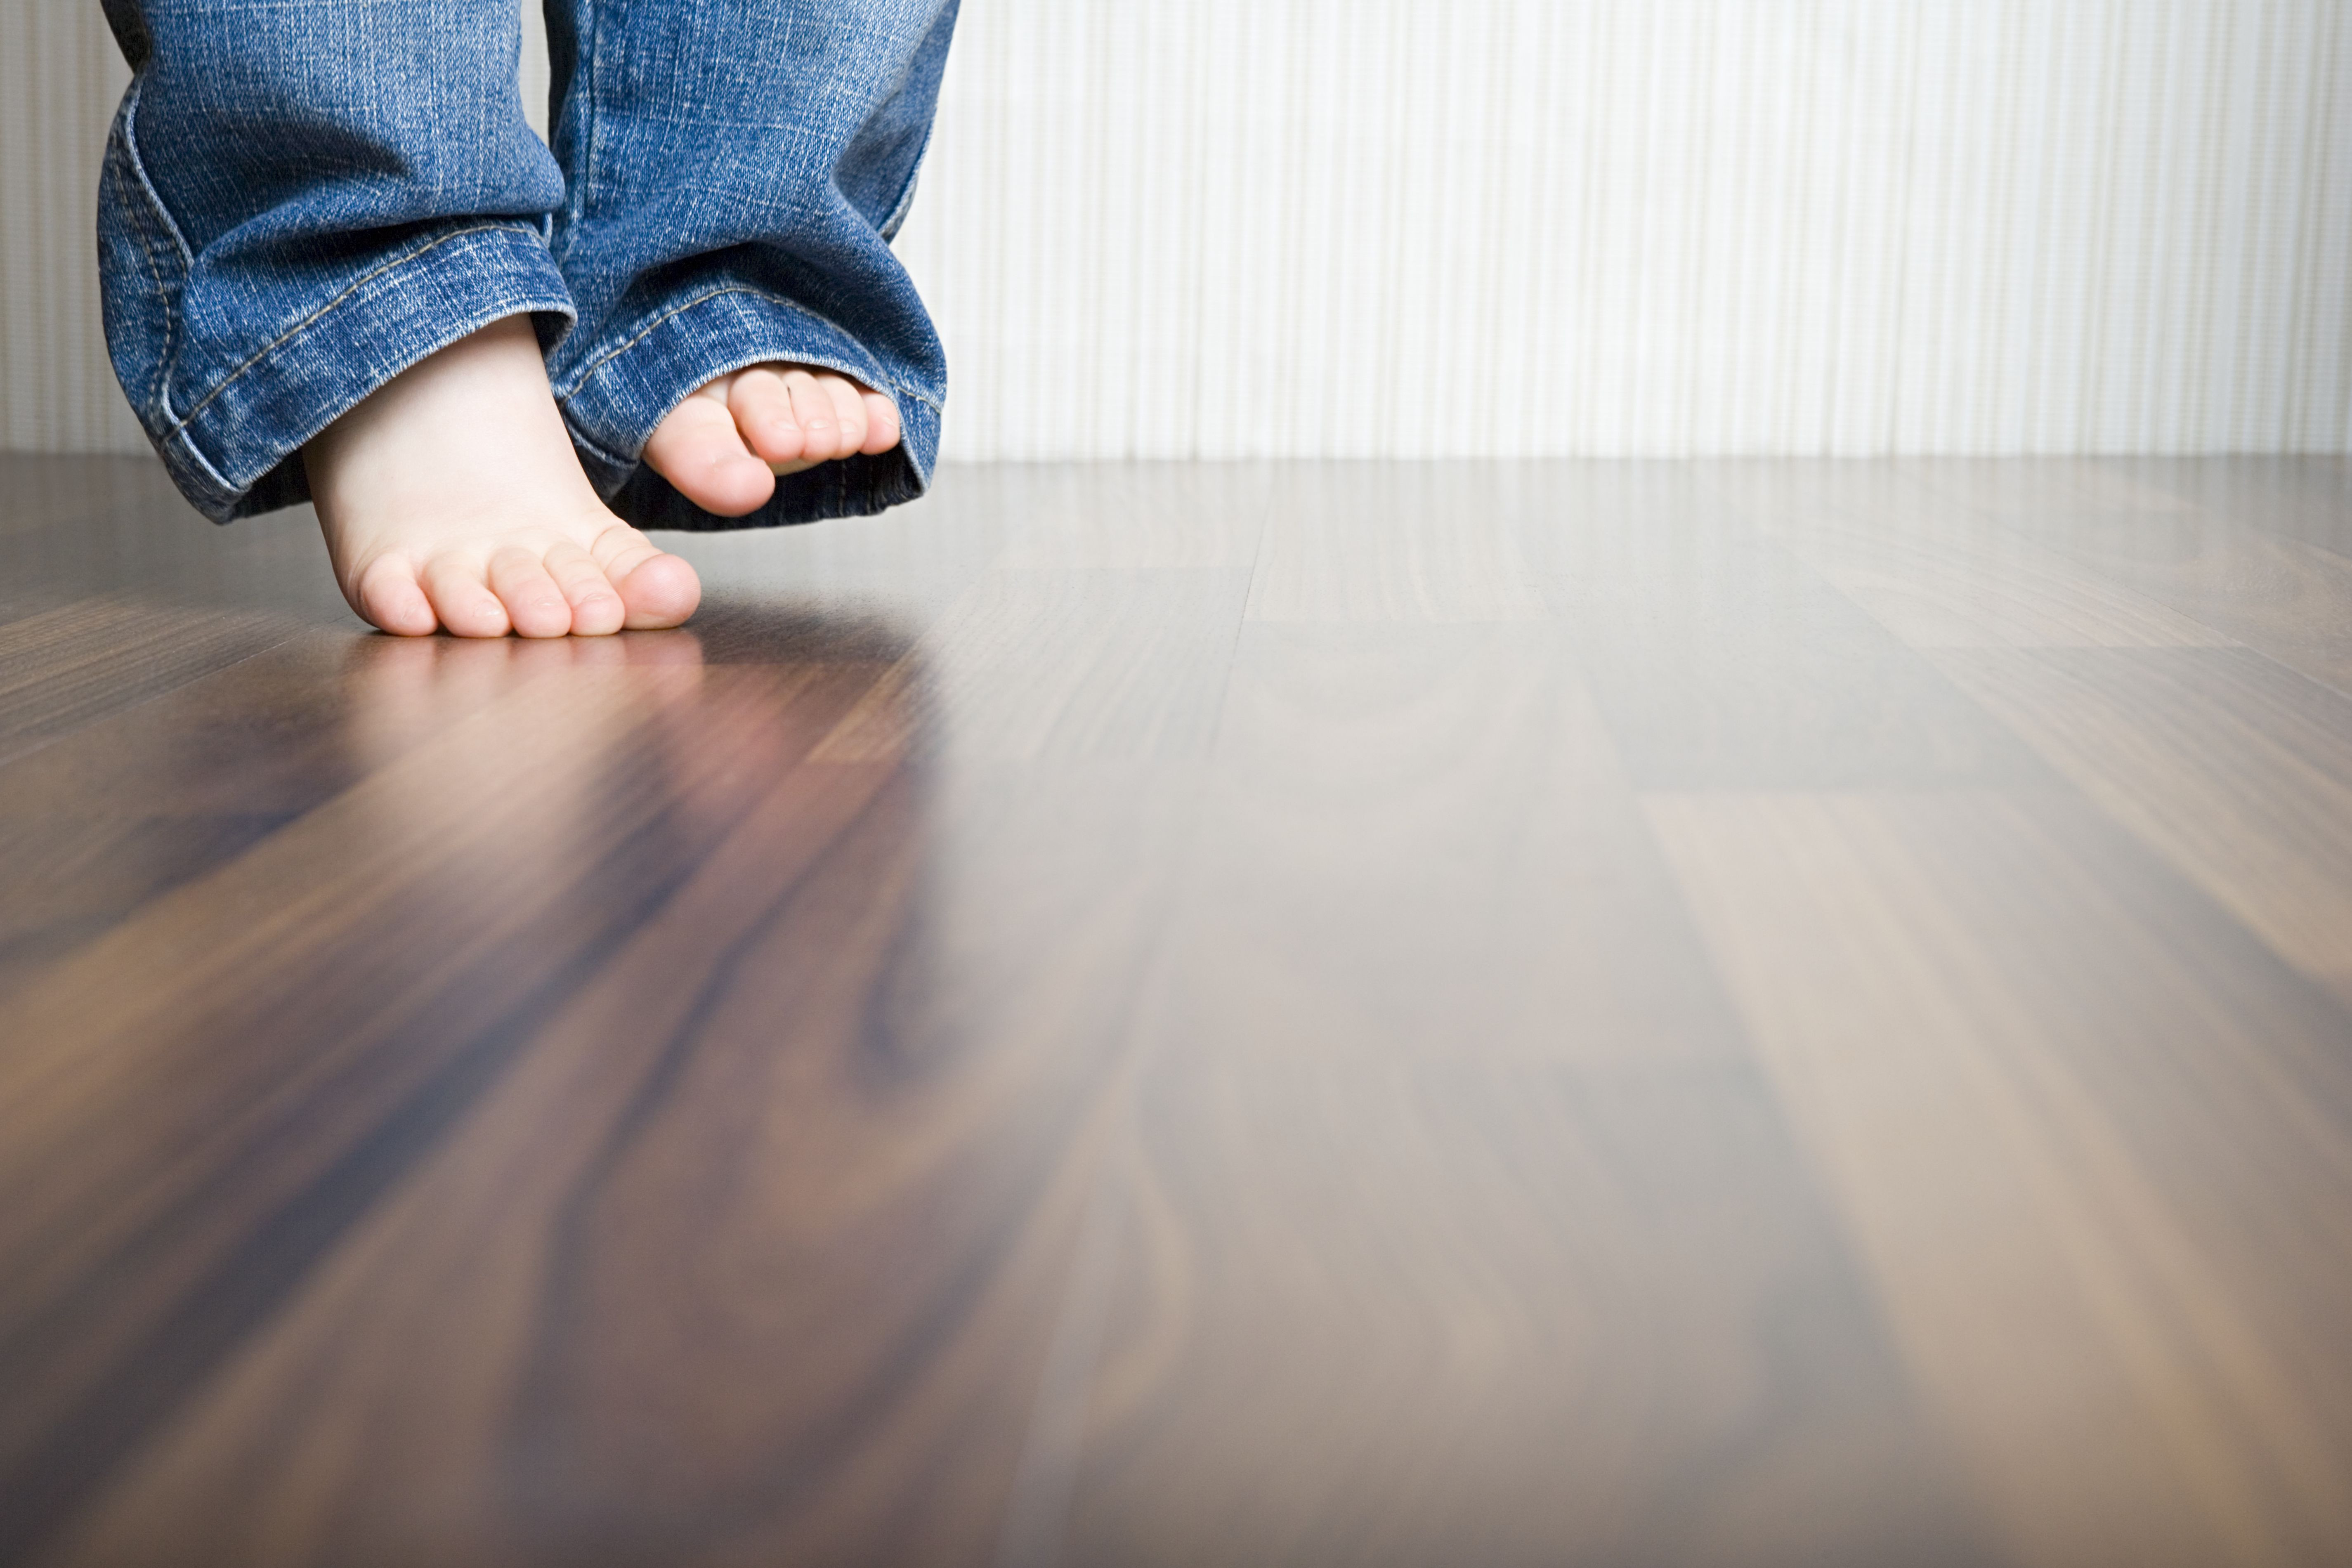 hardwood floor cleaner and restorer of how to clean hardwood floors best way to clean wood flooring with 1512149908 gettyimages 75403973